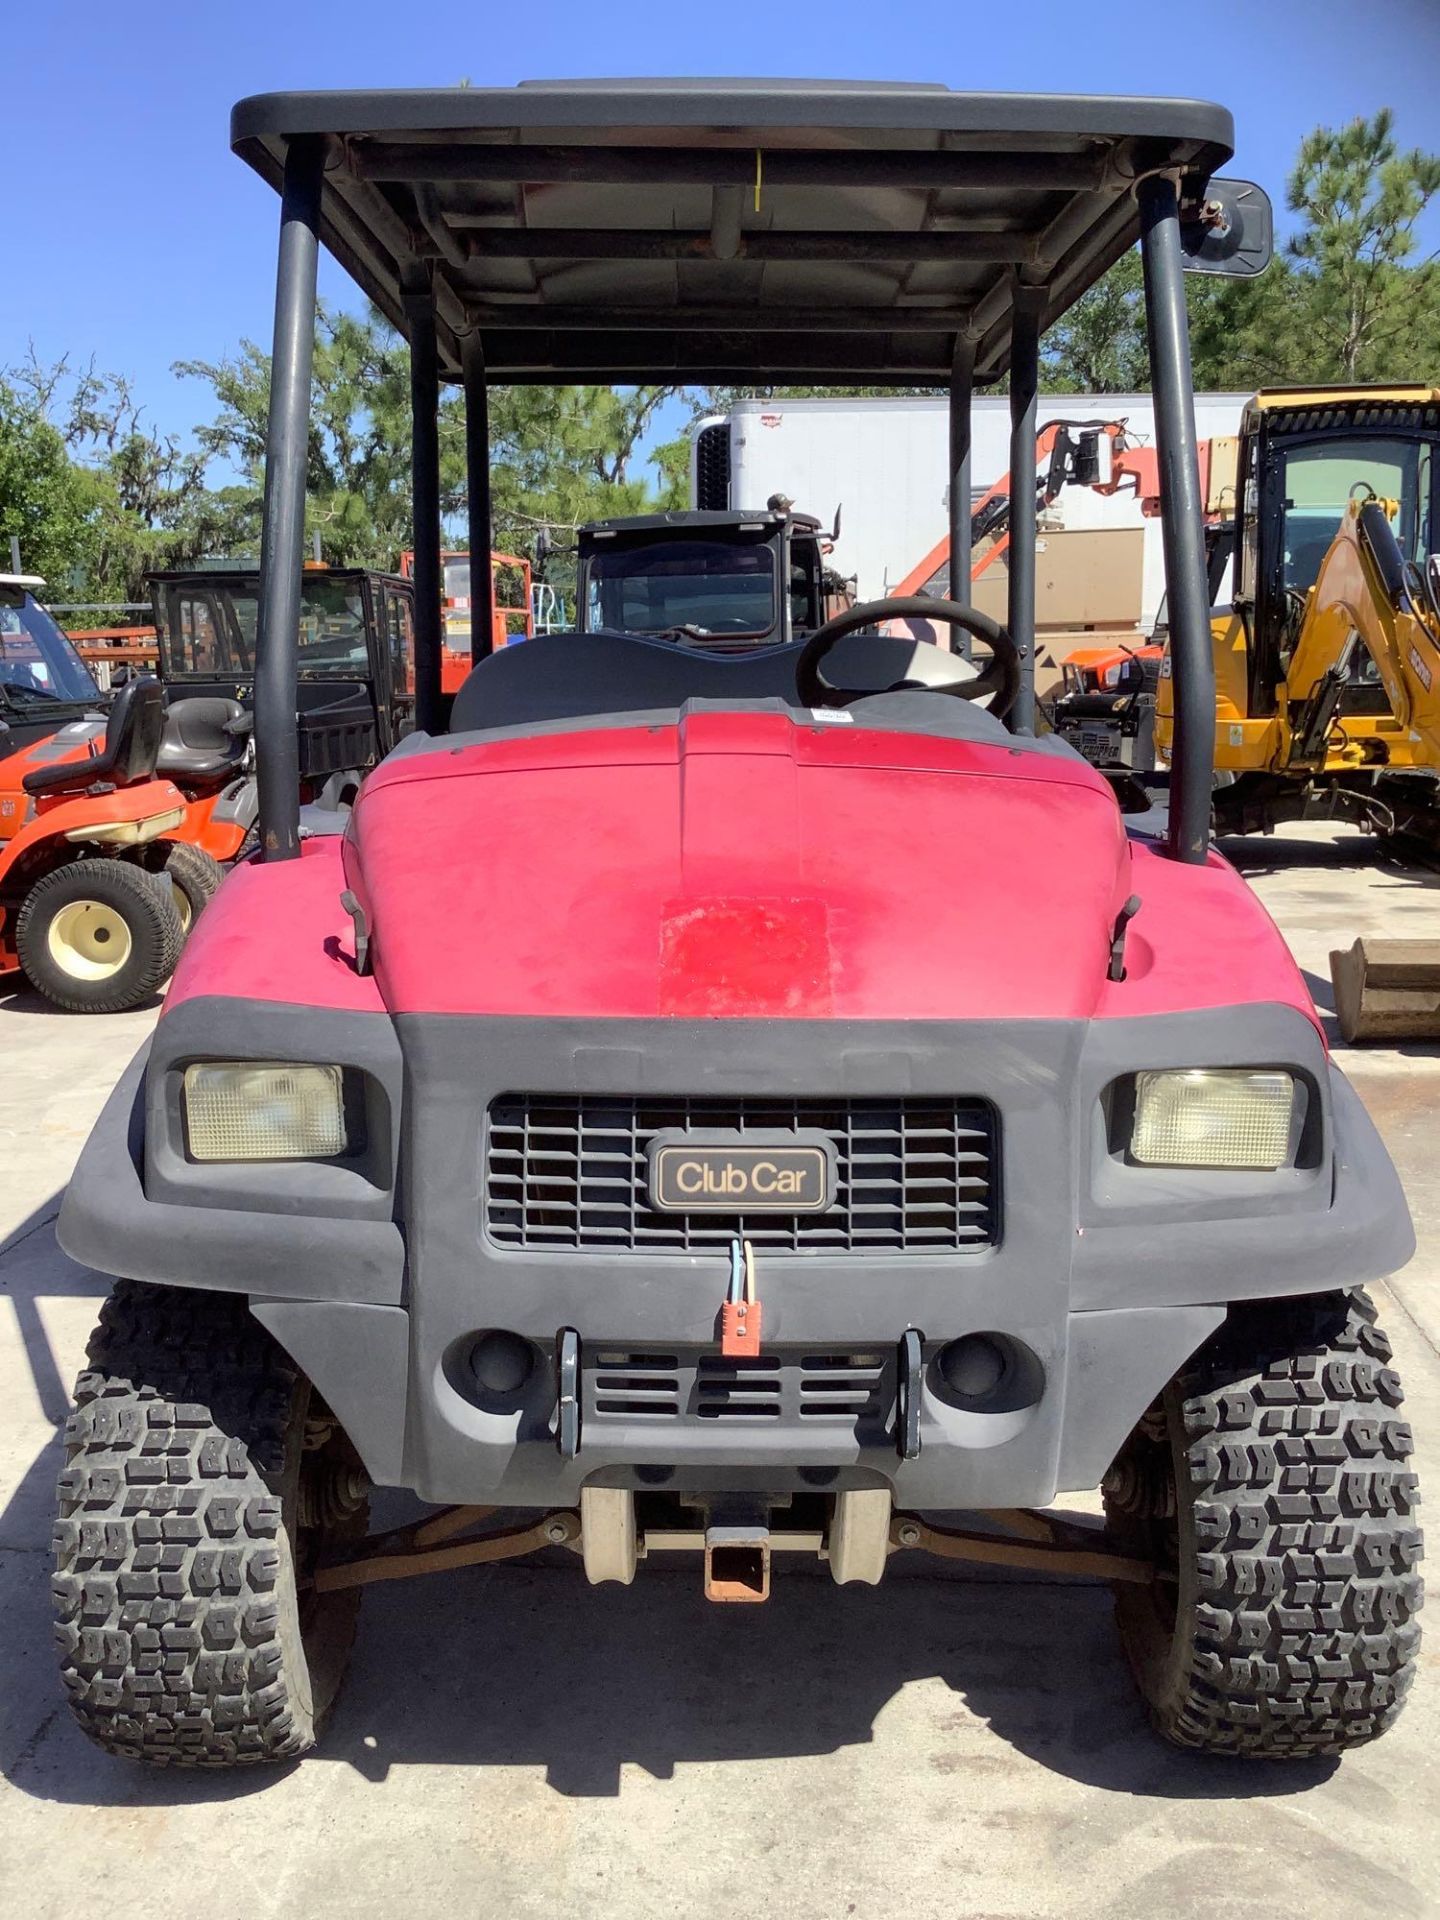 CLUB CAR CARYALL 295SE 4x4 INTELLITRAK GOLF CART, GAS POWERED , MANUAL DUMP BED, HITCH IN FRONT & BA - Image 14 of 19